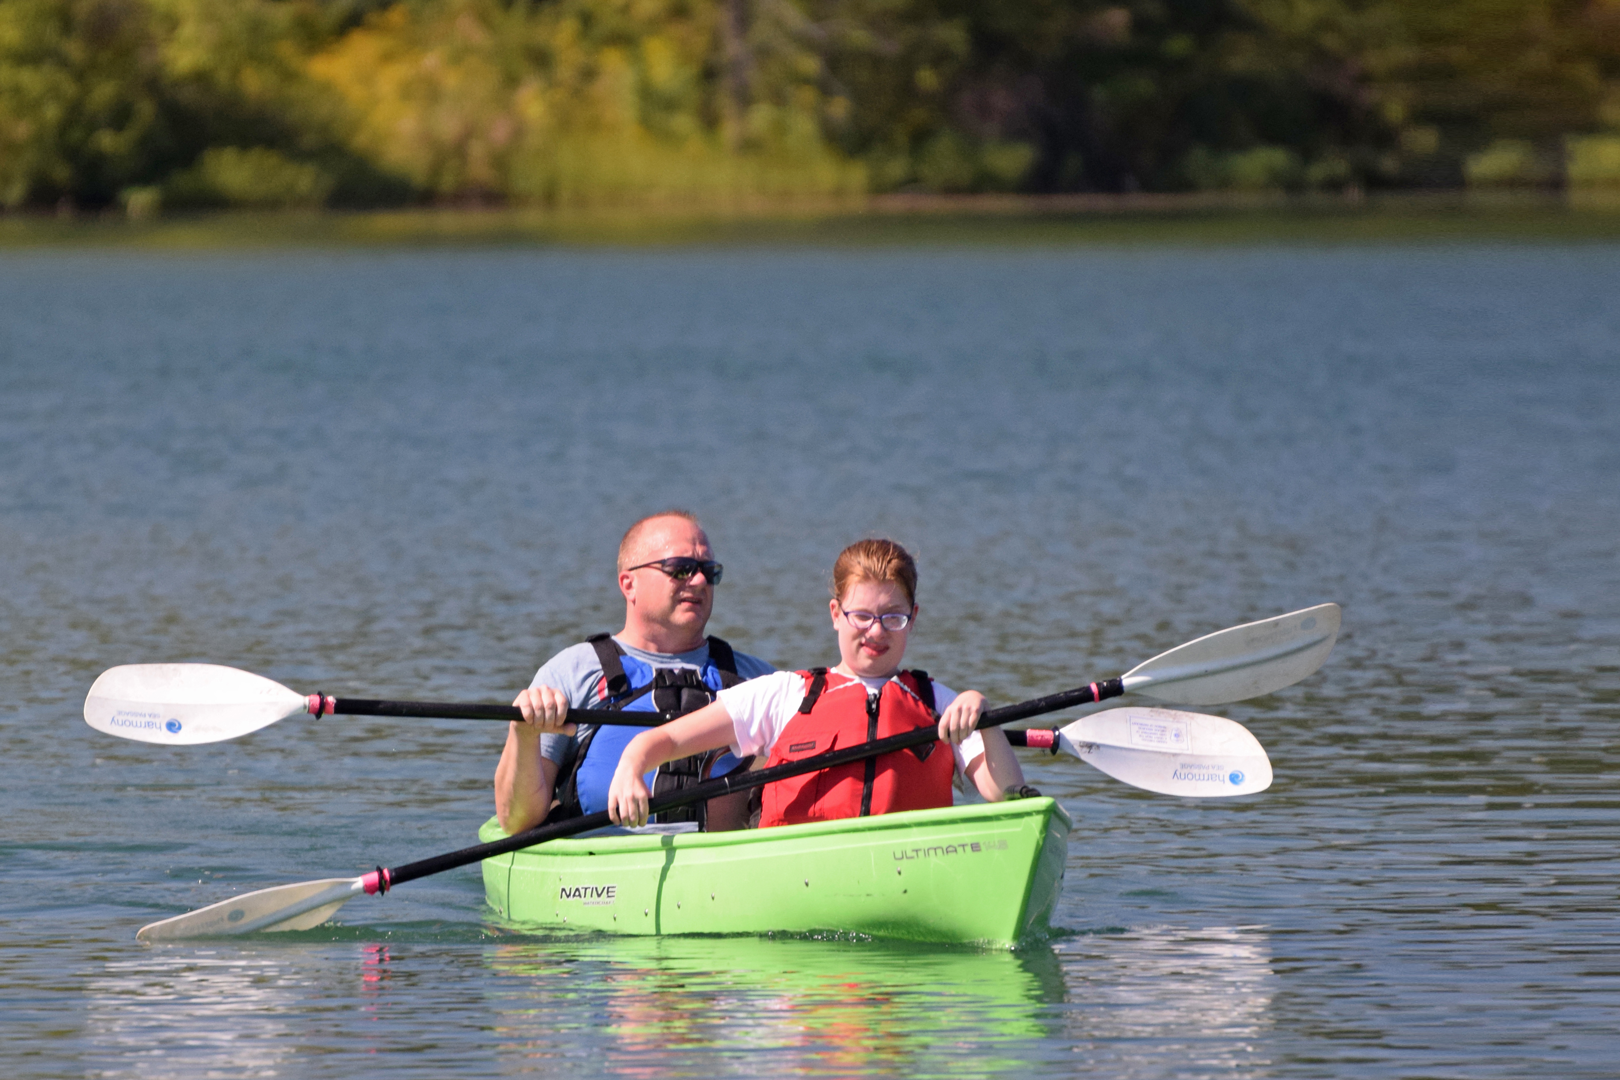 Canoeists on lake for an Outdoor Adaptive Adventures program at Prairie Oaks.